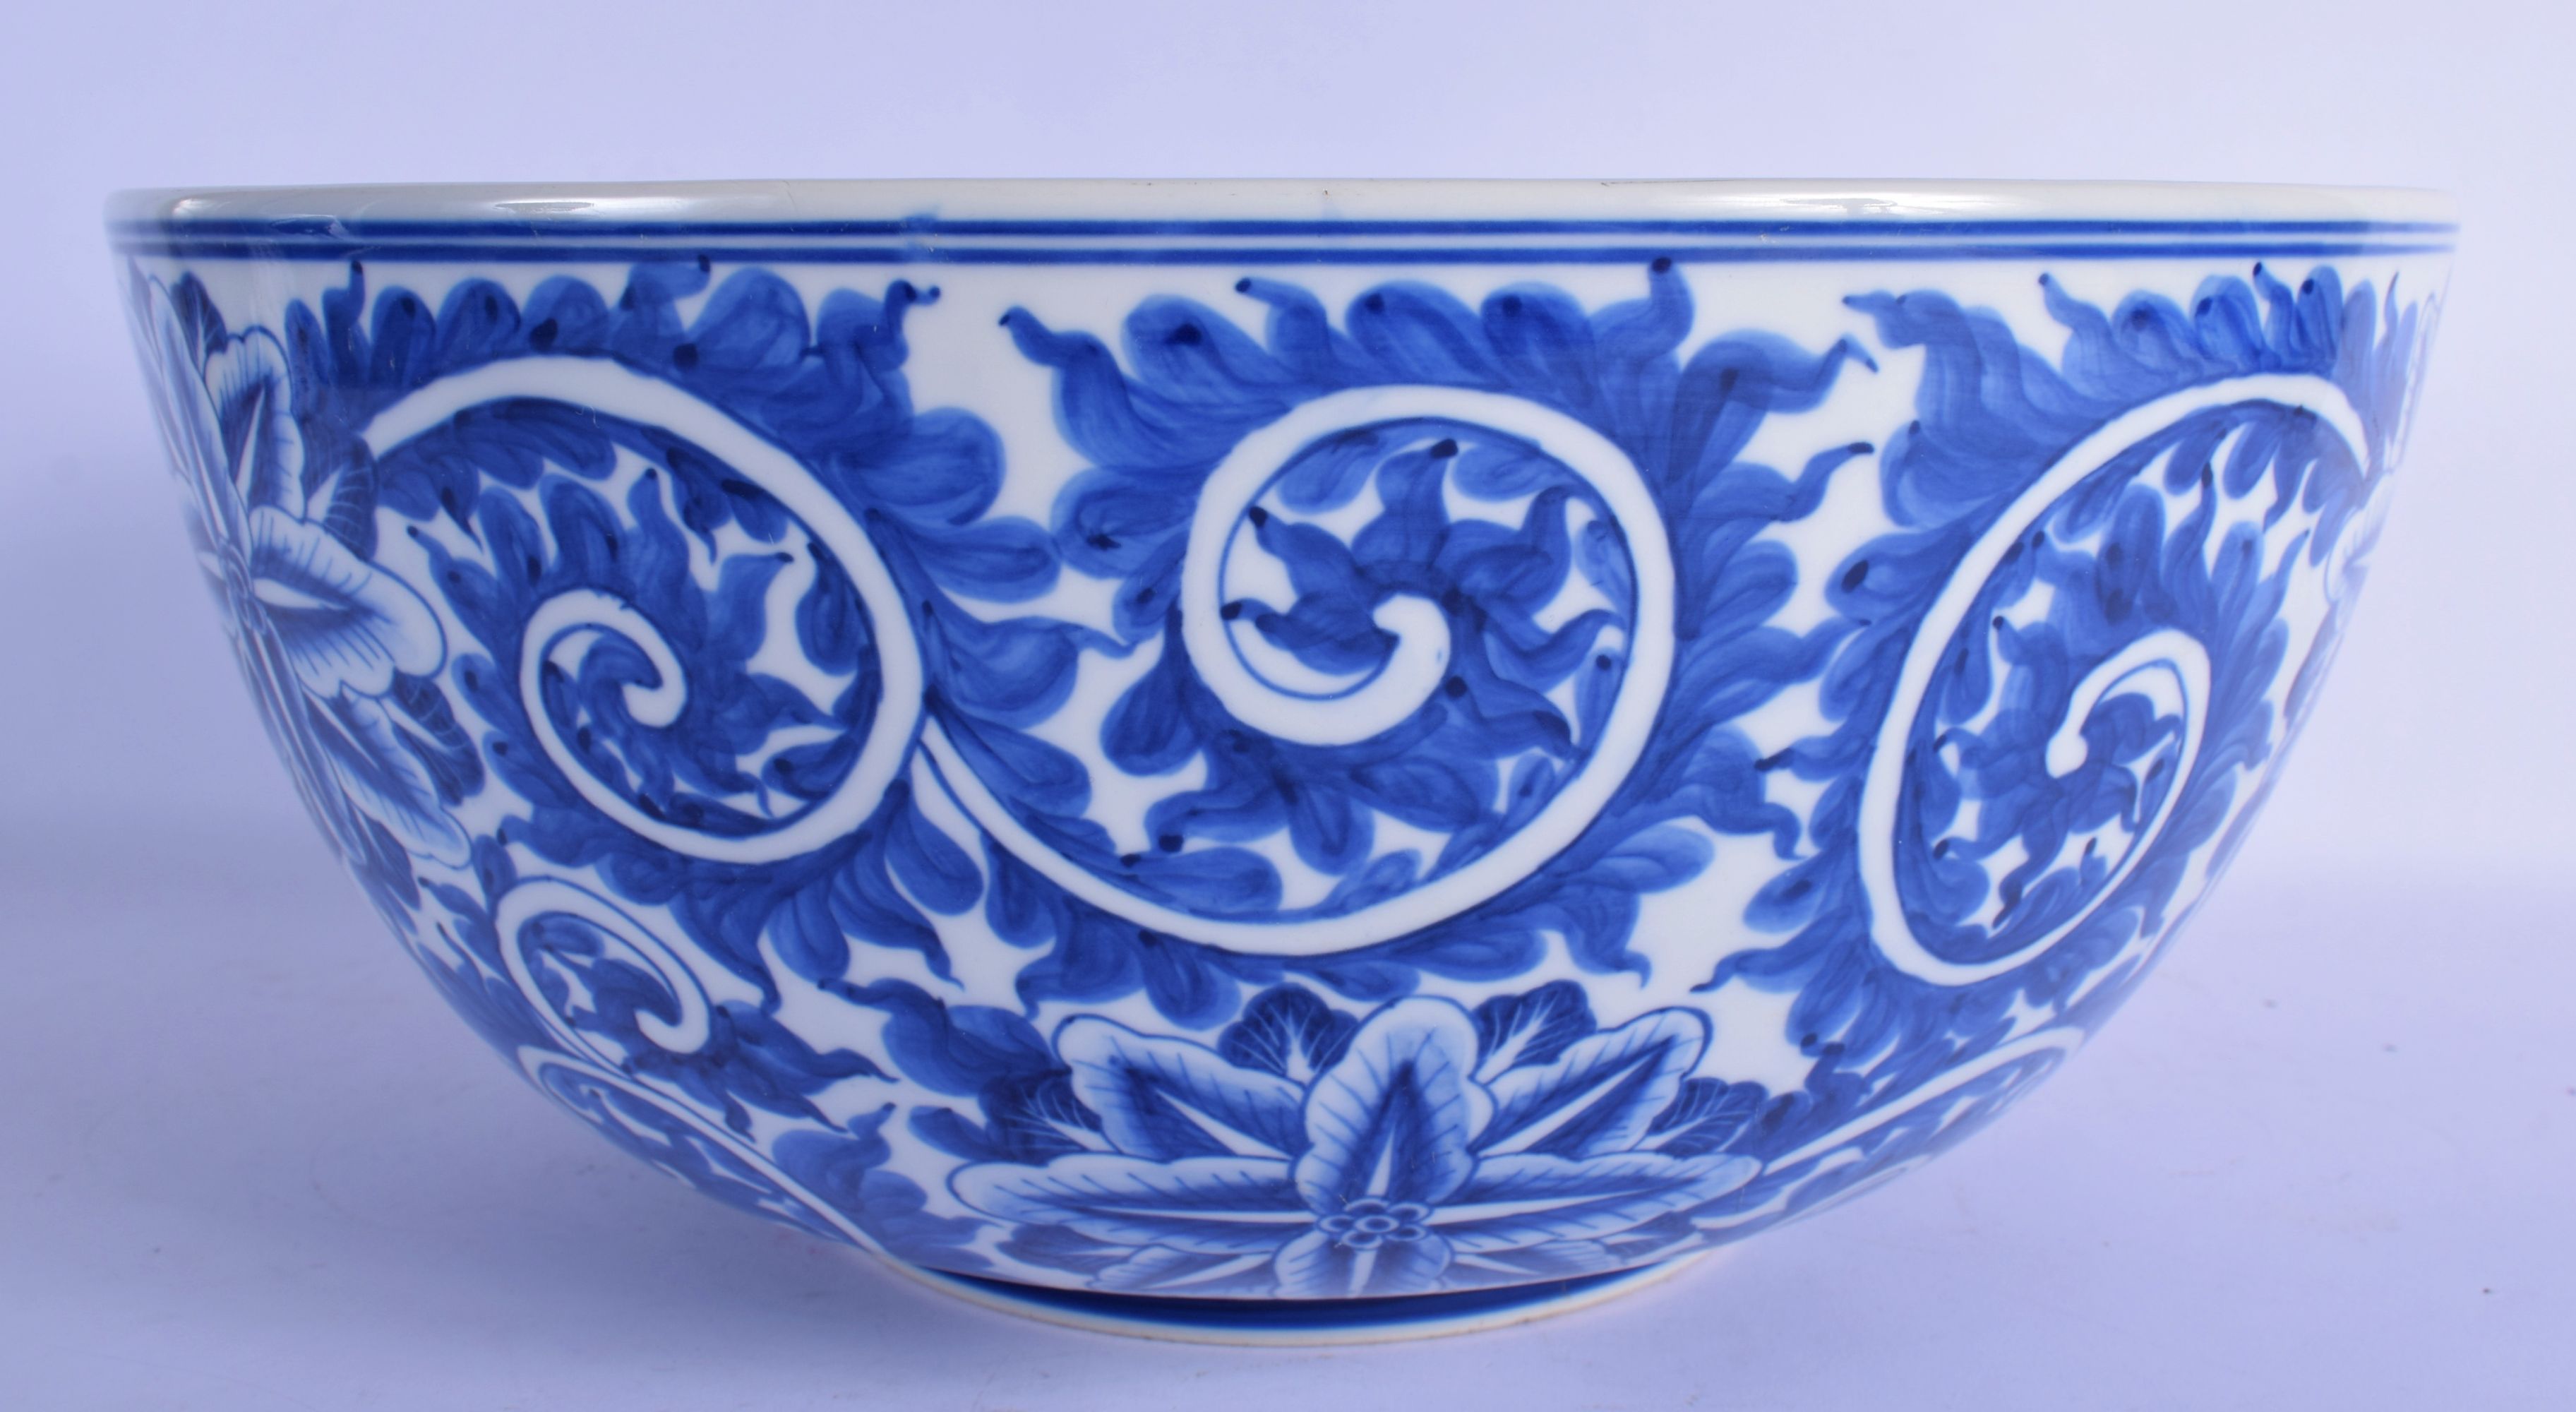 A LARGE 19TH CENTURY CONTINENTAL BLUE AND WHITE PORCELAIN BOWL well painted with bold floral sprays. - Image 3 of 5